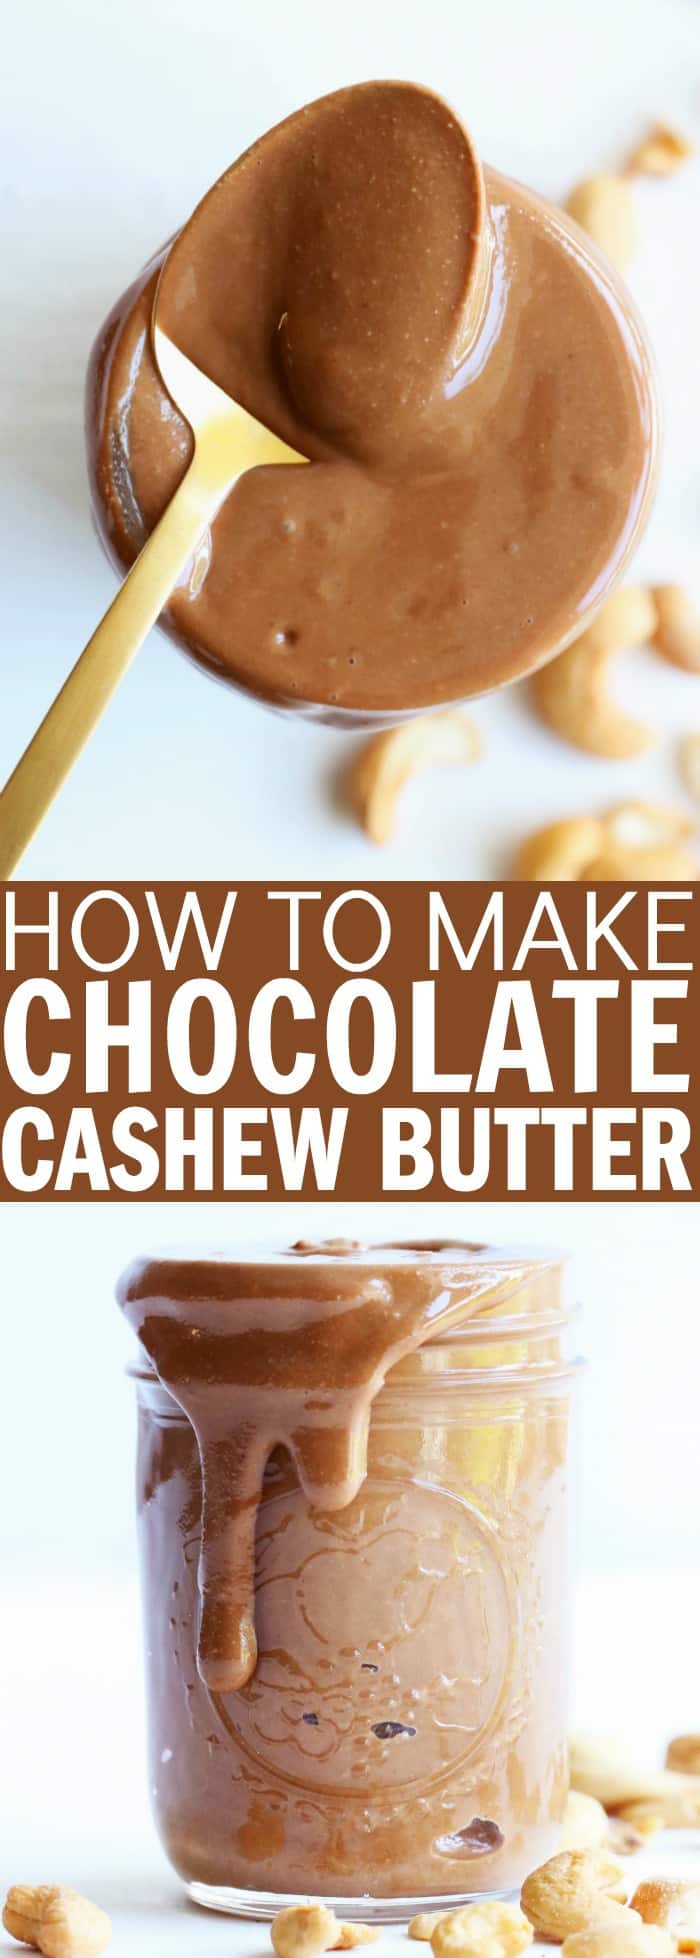 You'll LOVE this recipe for how to make homemade chocolate cashew butter!! It's such a delicious and fun recipe to switch up your nut butter habit! thetoastedpinenut.com #thetoastedpinenut #howto #homemade #diy #cashew #butter #chocolate #nut